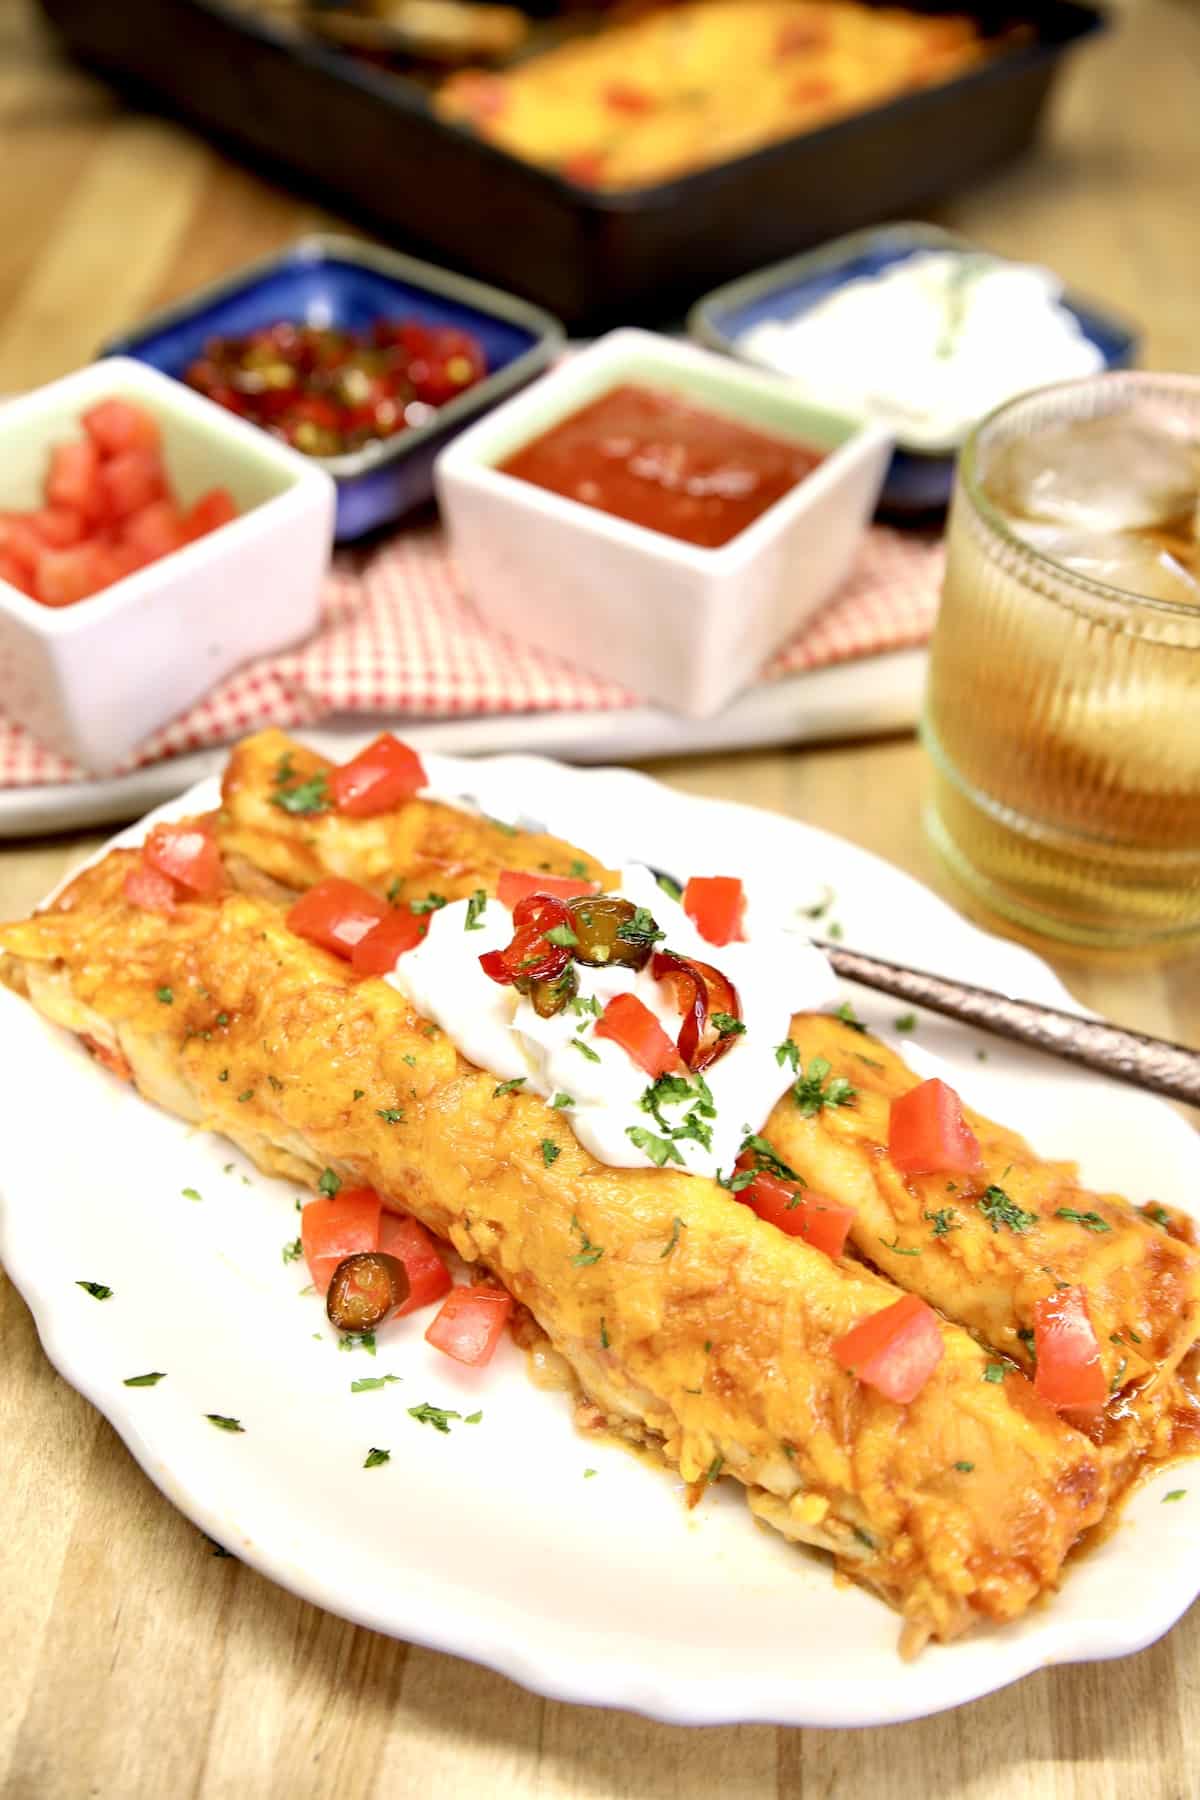 Plate with 2 enchiladas, sour cream and tomatoes.